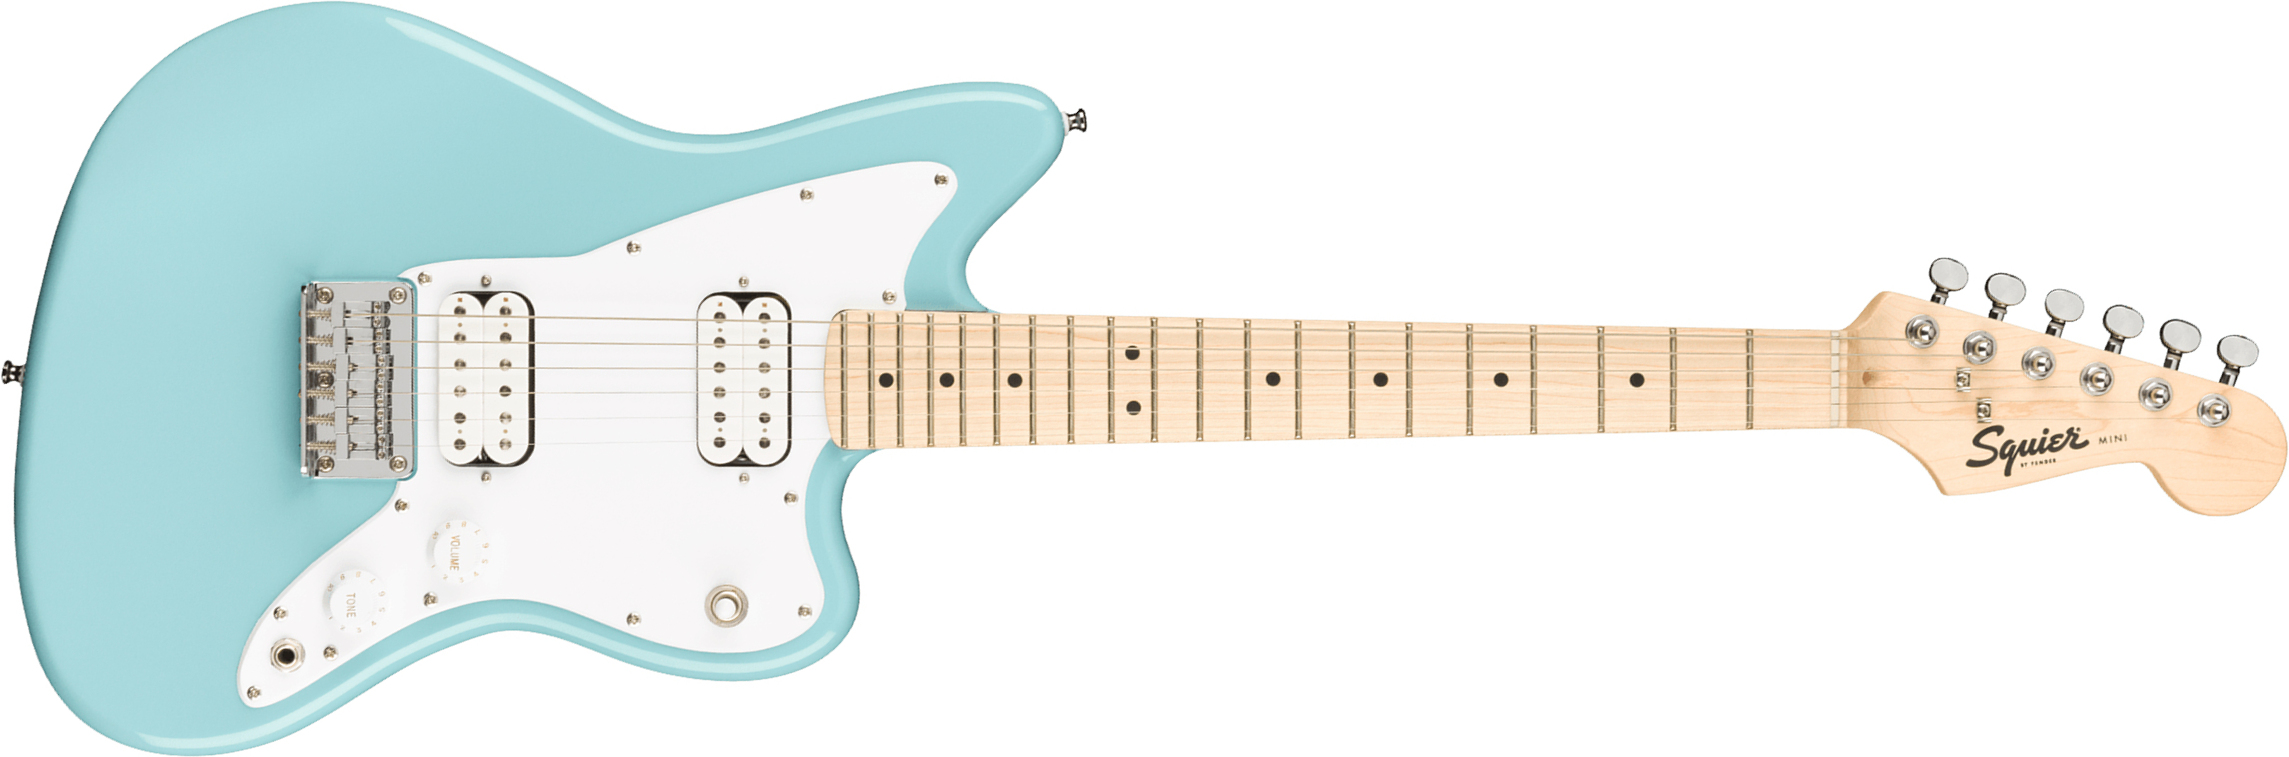 Squier Mini Jazzmaster Bullet Hh Ht Mn - Daphne Blue - Electric guitar for kids - Main picture